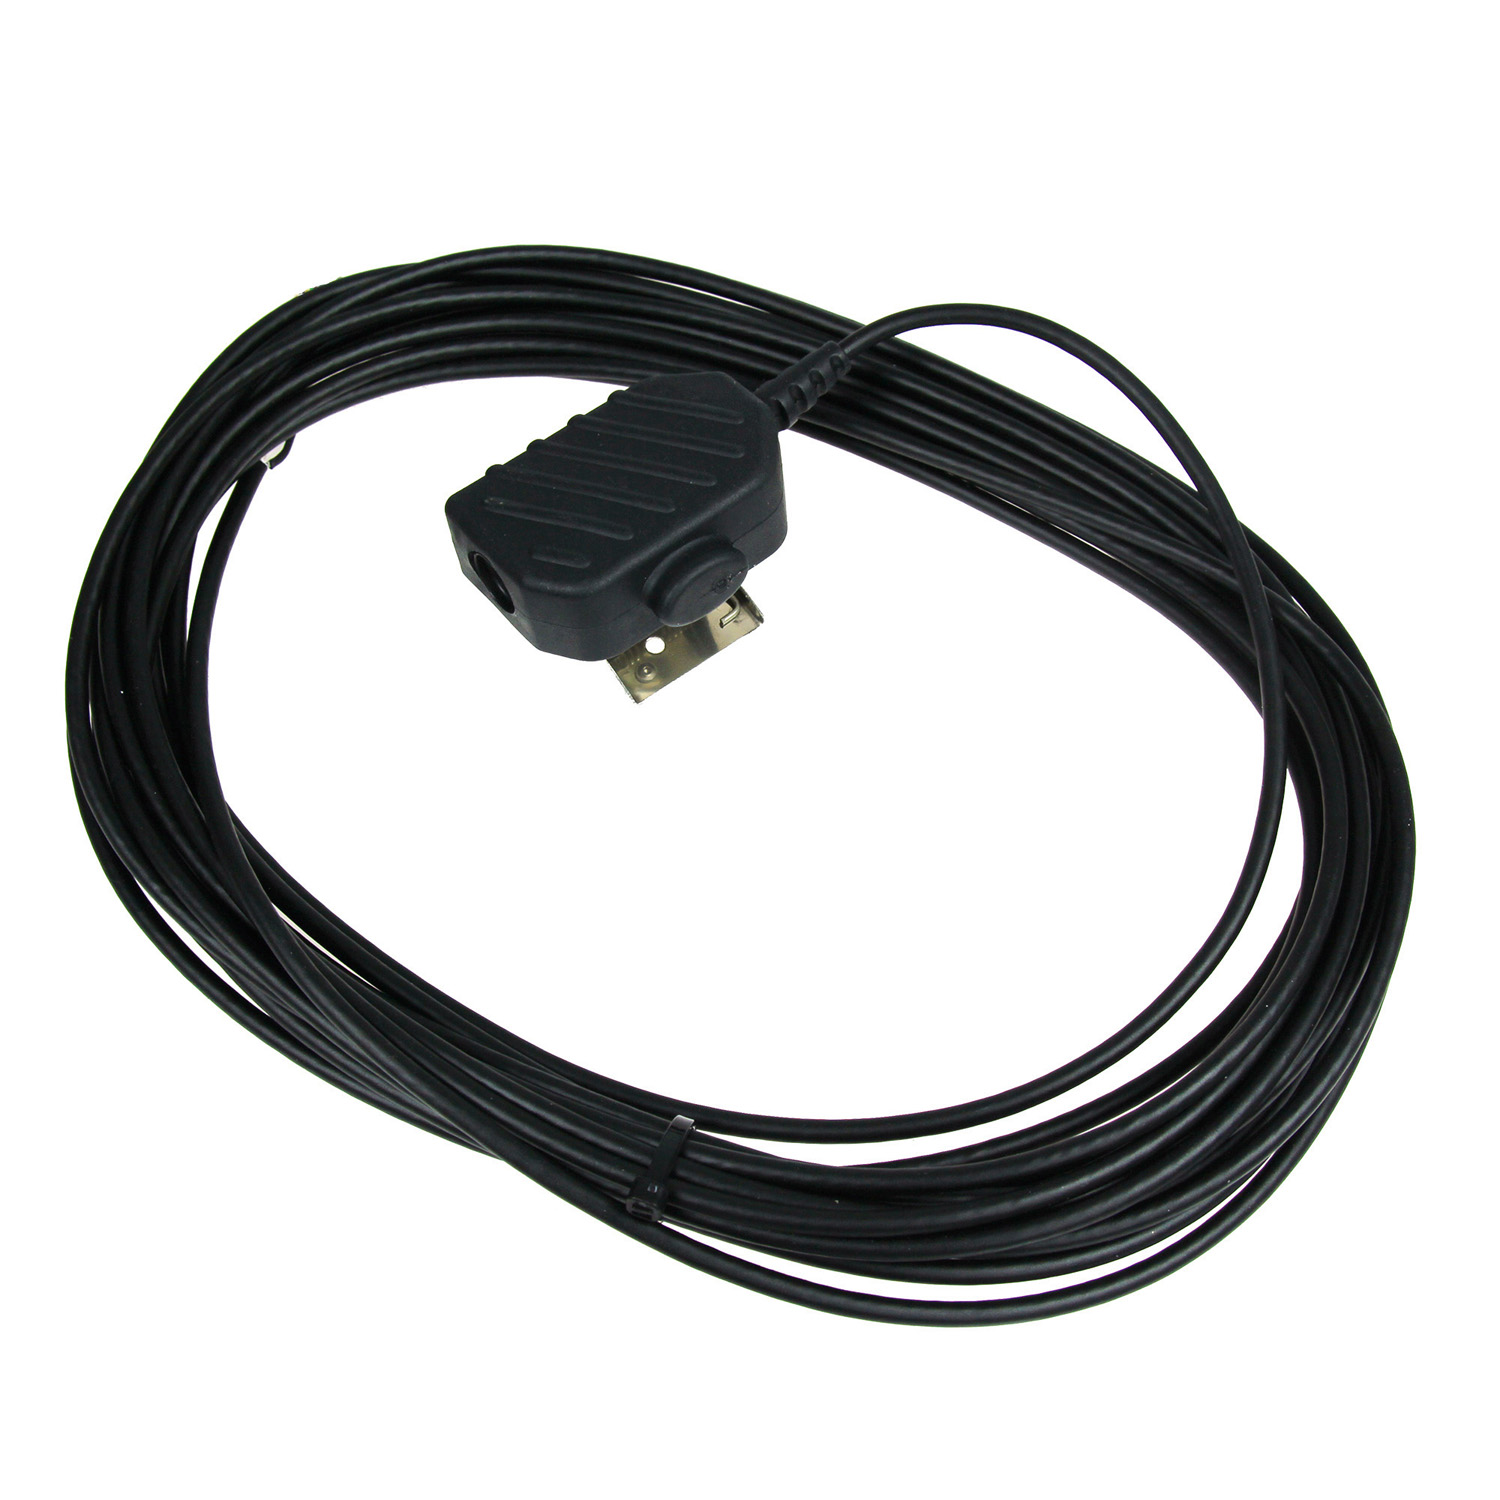 1008150025 TAX-2B with 10m cable and plugbox w/PTT for EX headset